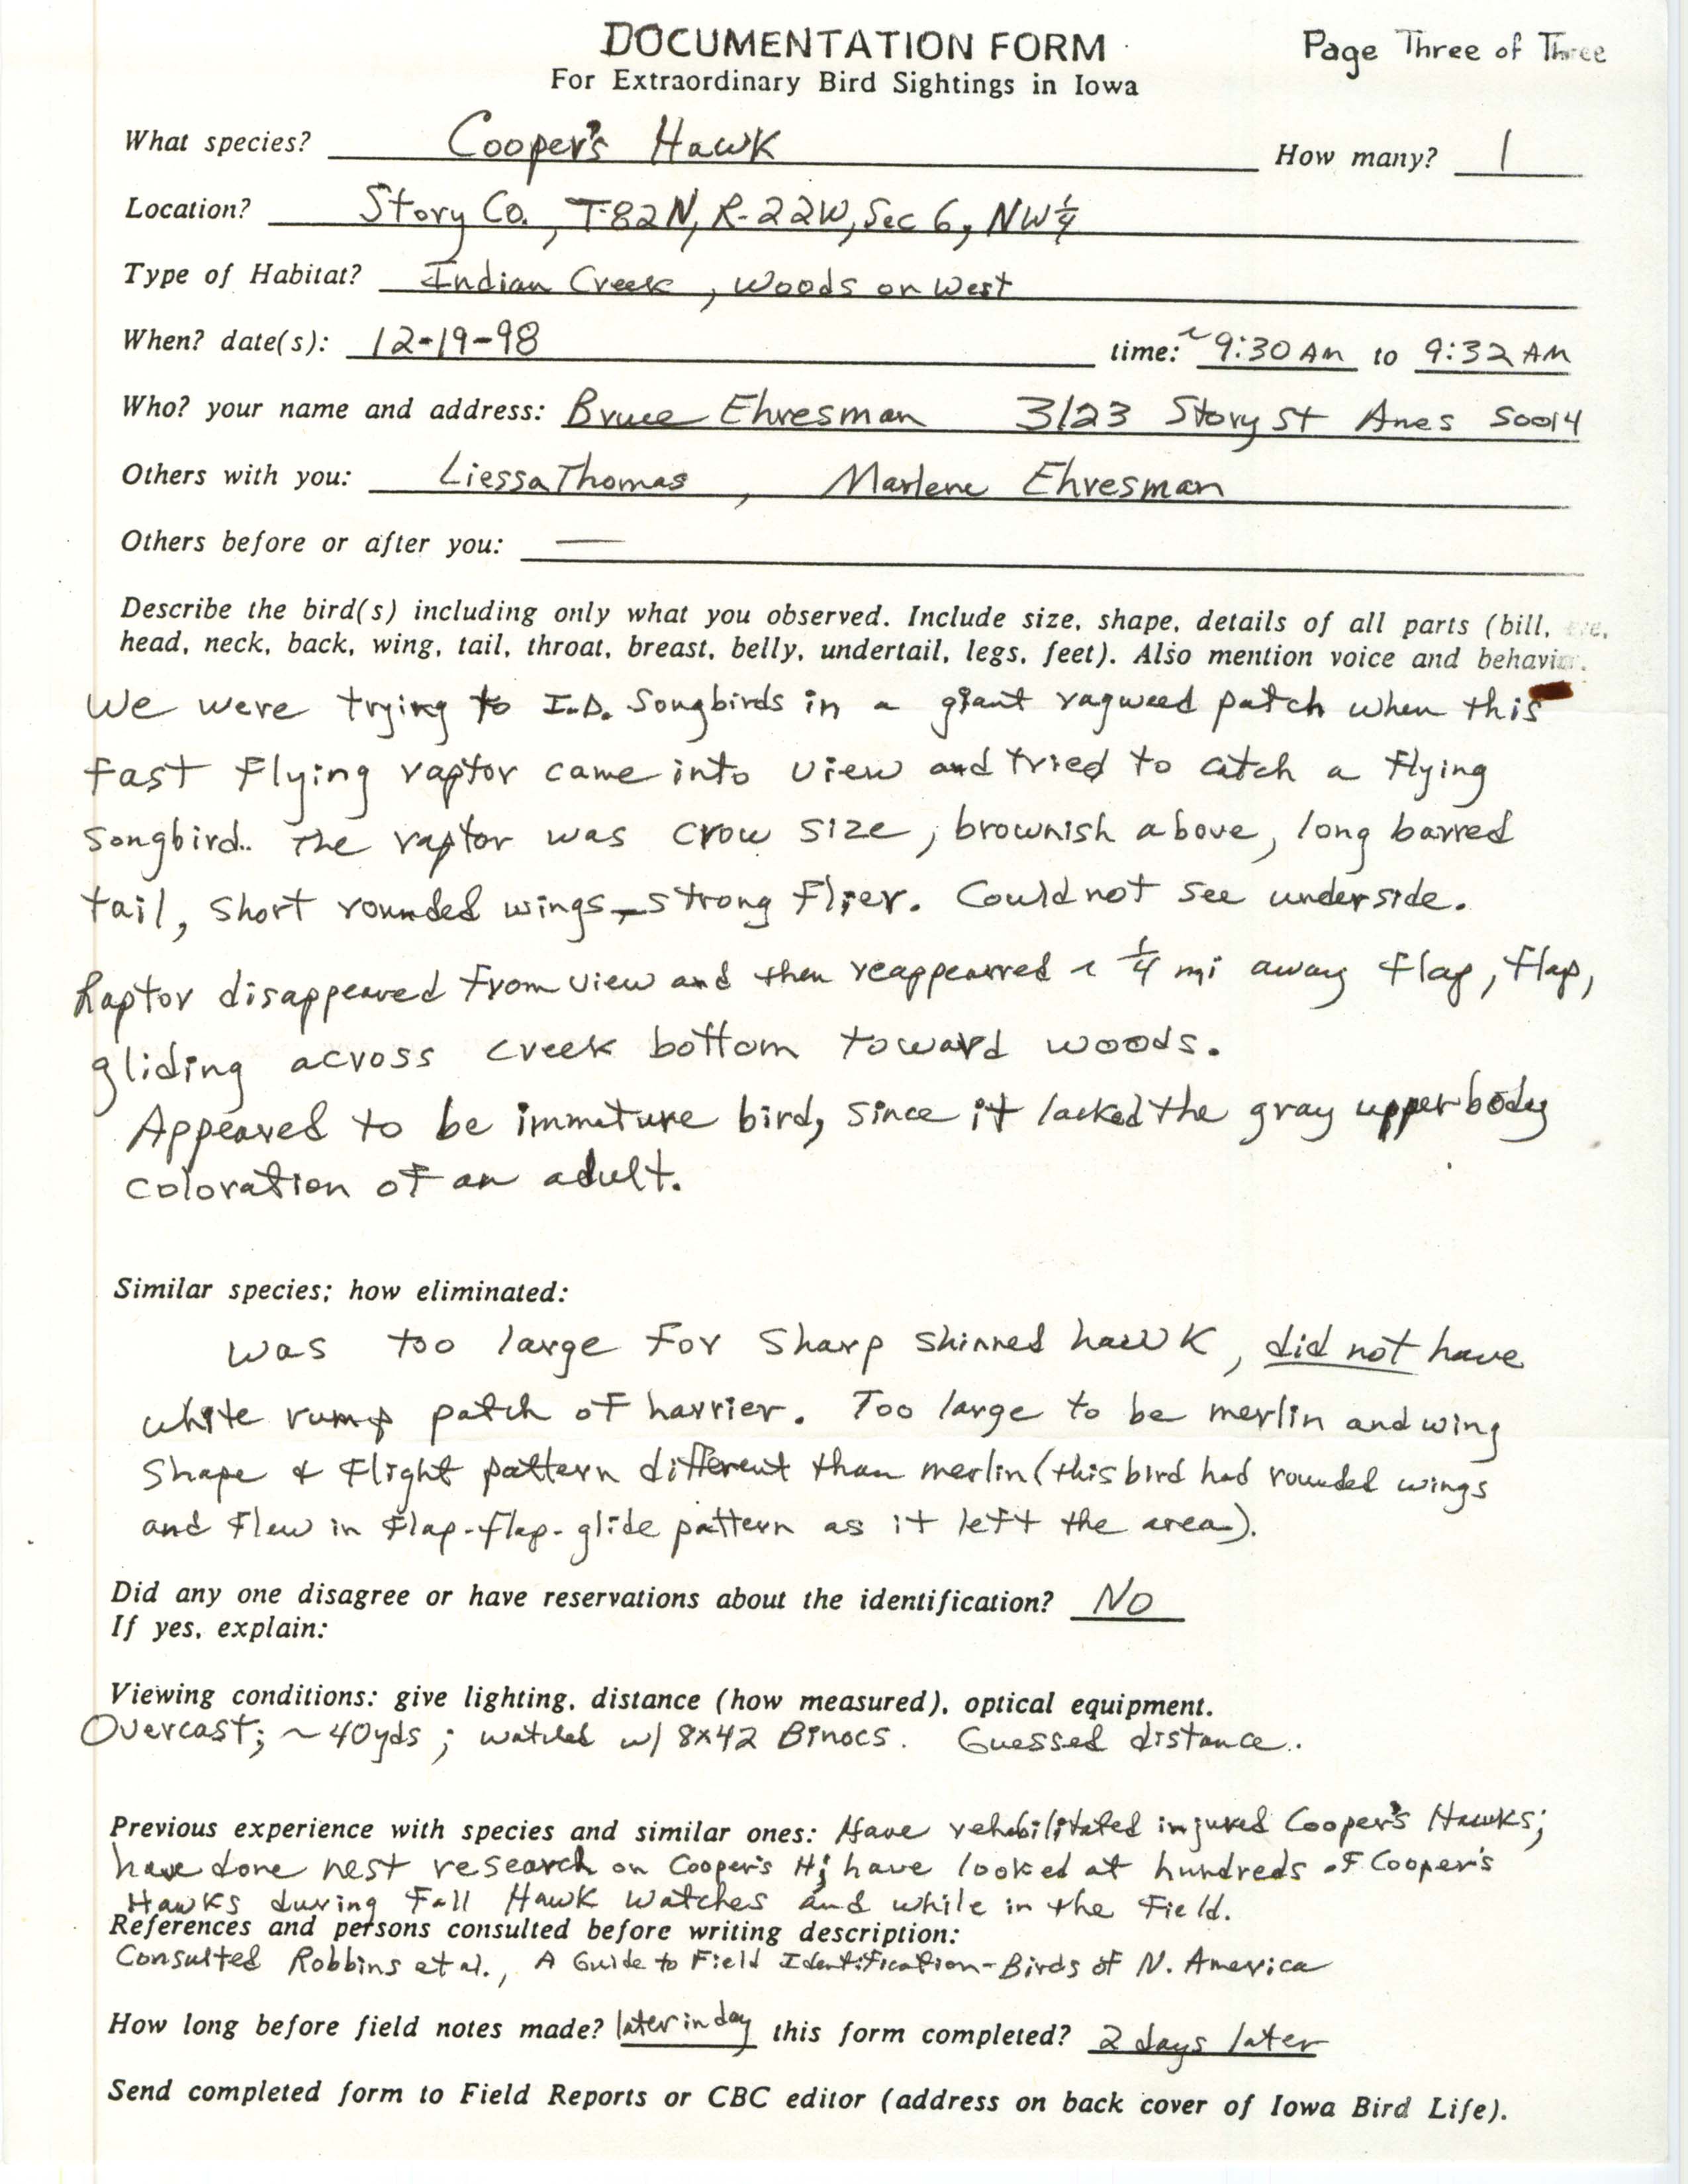 Rare bird documentation form for Cooper's Hawk at Story County, 1998